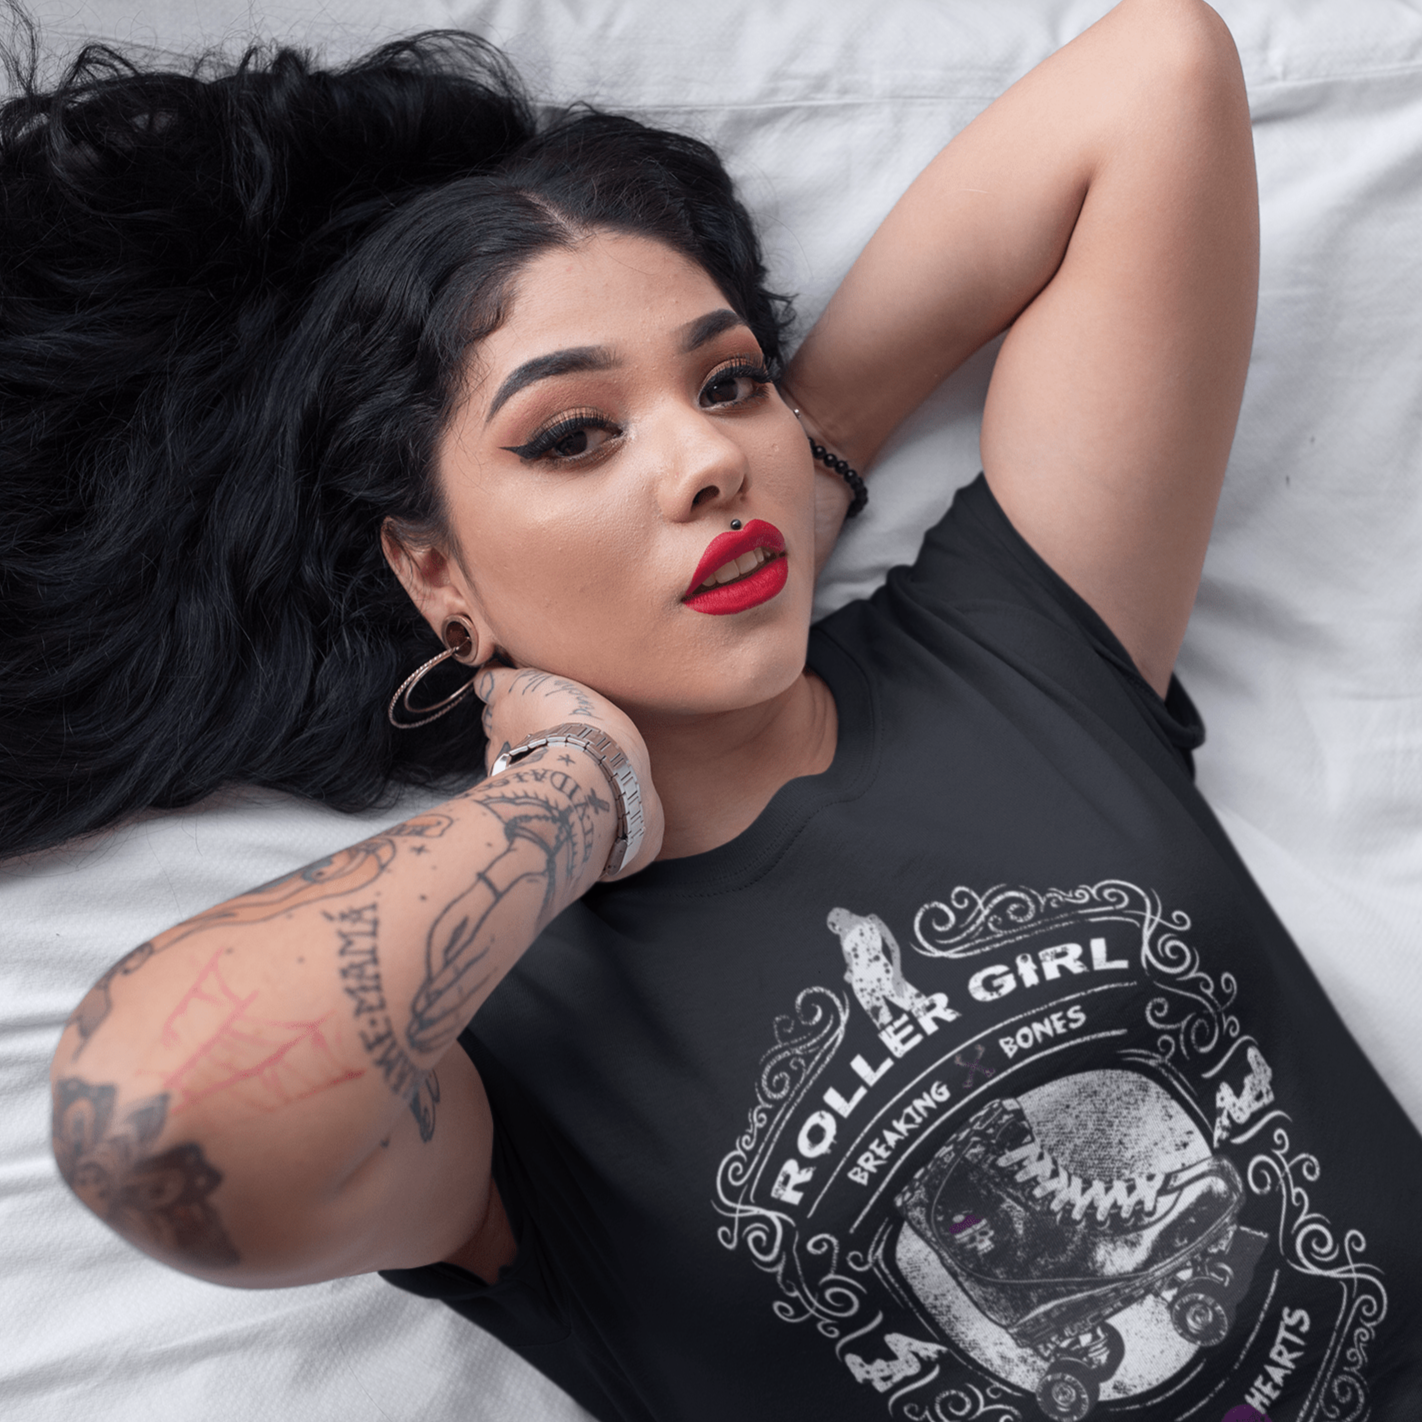 young woman with tattoos wearing roller girl tee